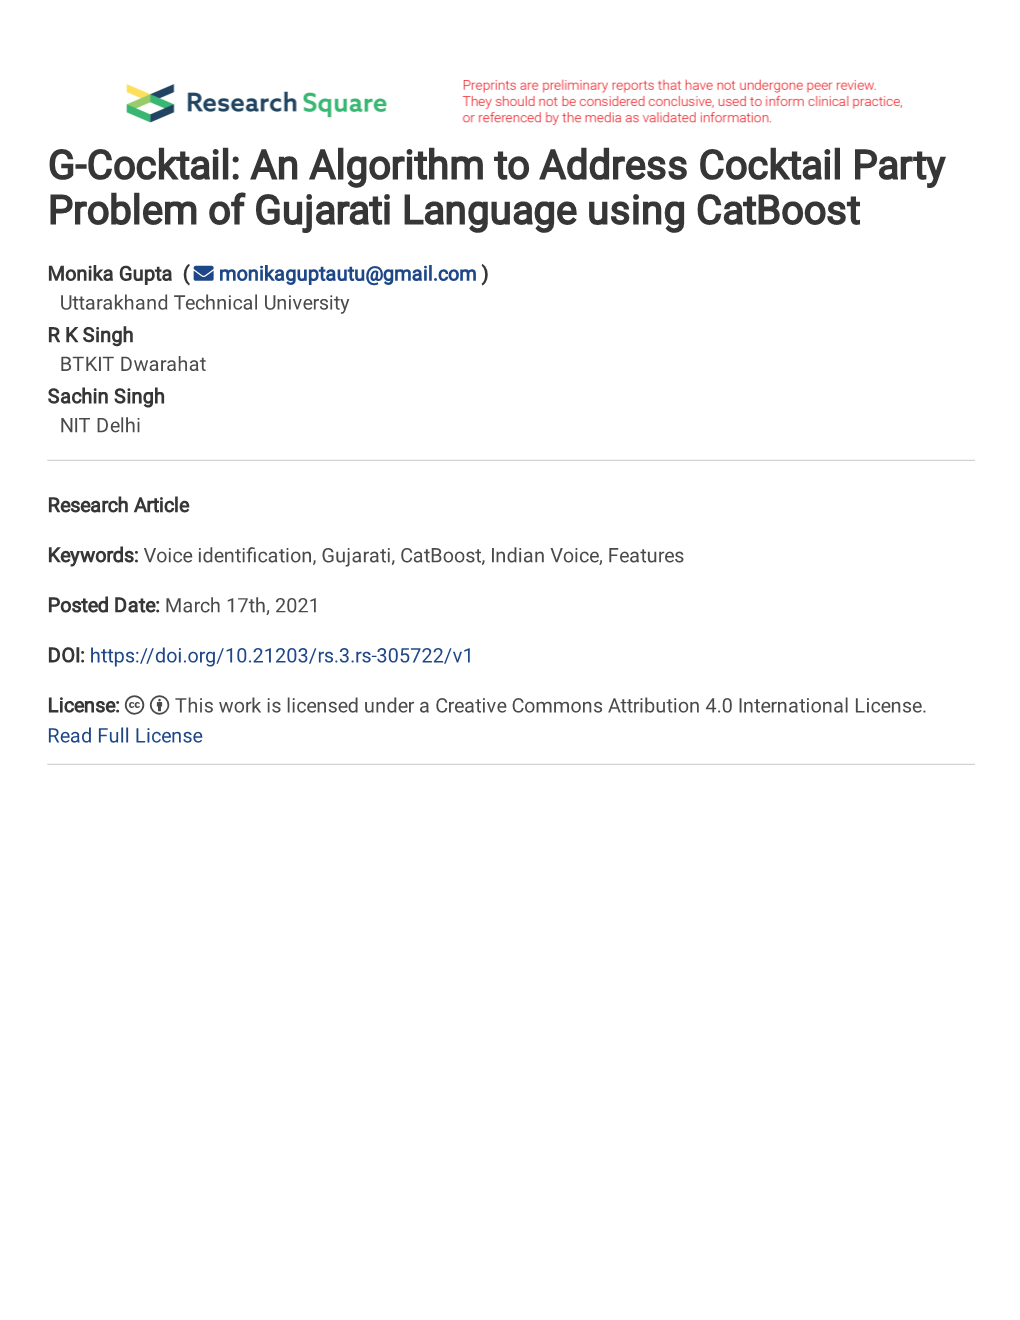 An Algorithm to Address Cocktail Party Problem of Gujarati Language Using Catboost